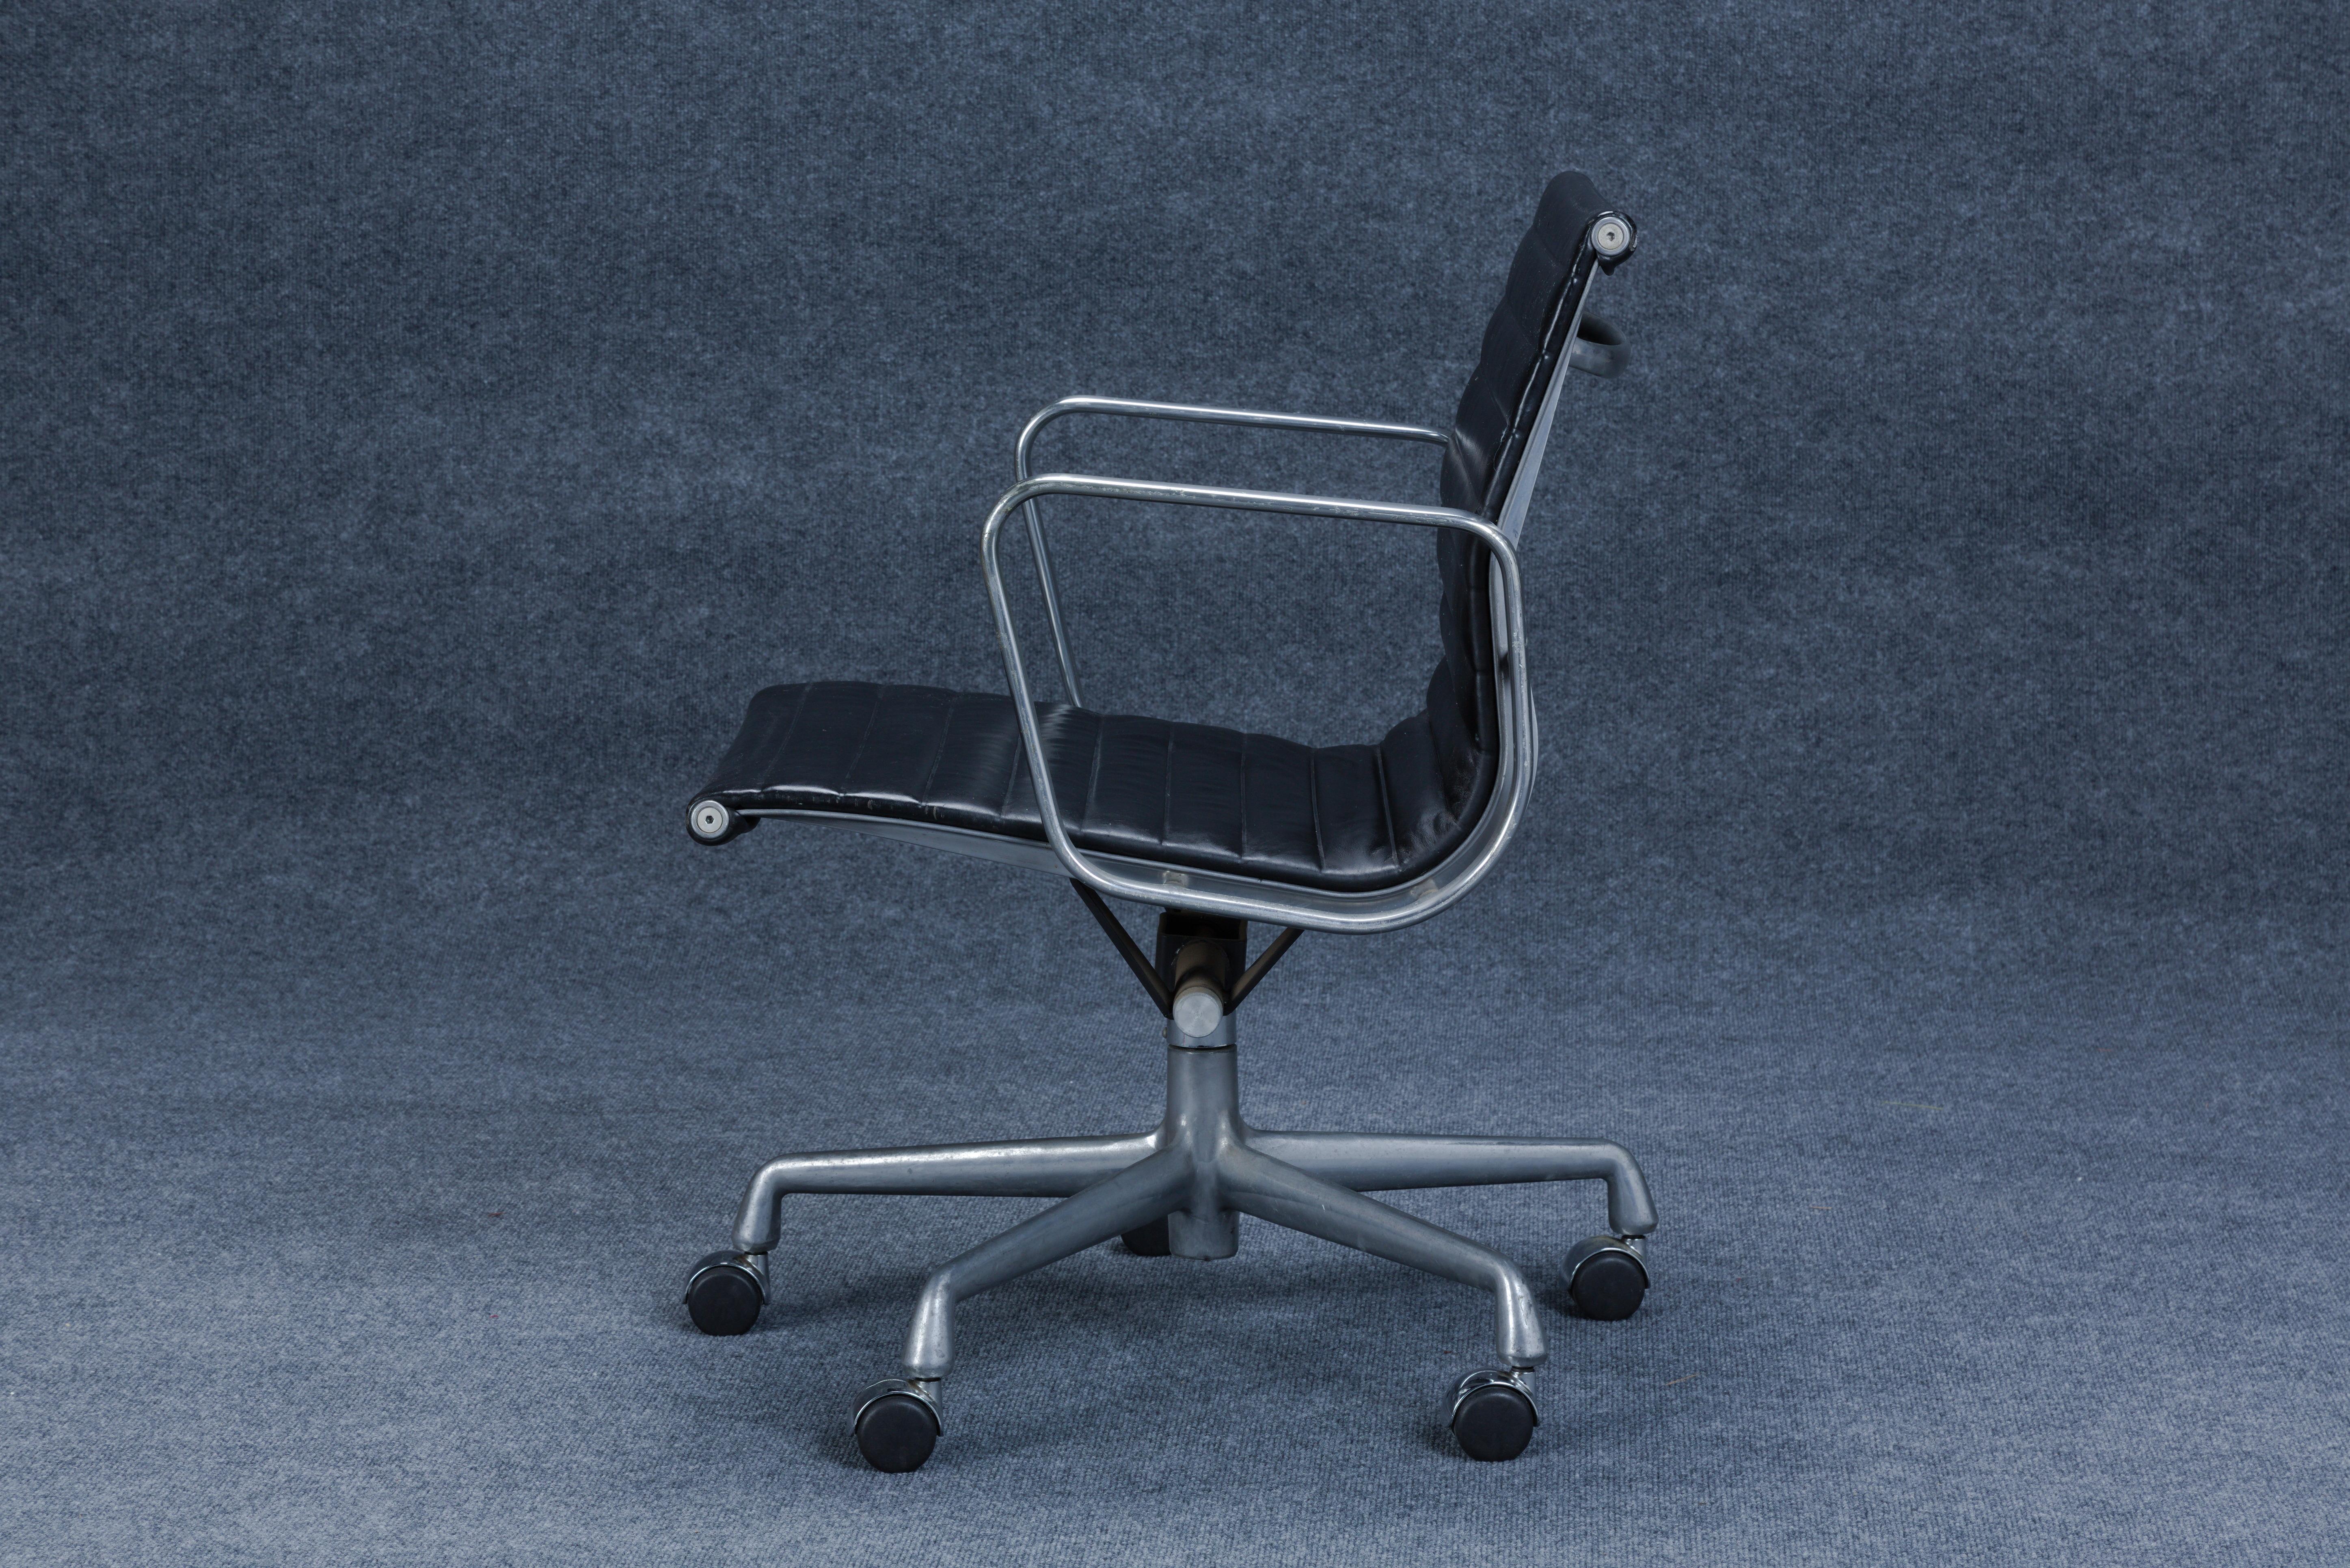 American Herman Miller Aluminum Group Management Chair by Charles Eames, c. 1965